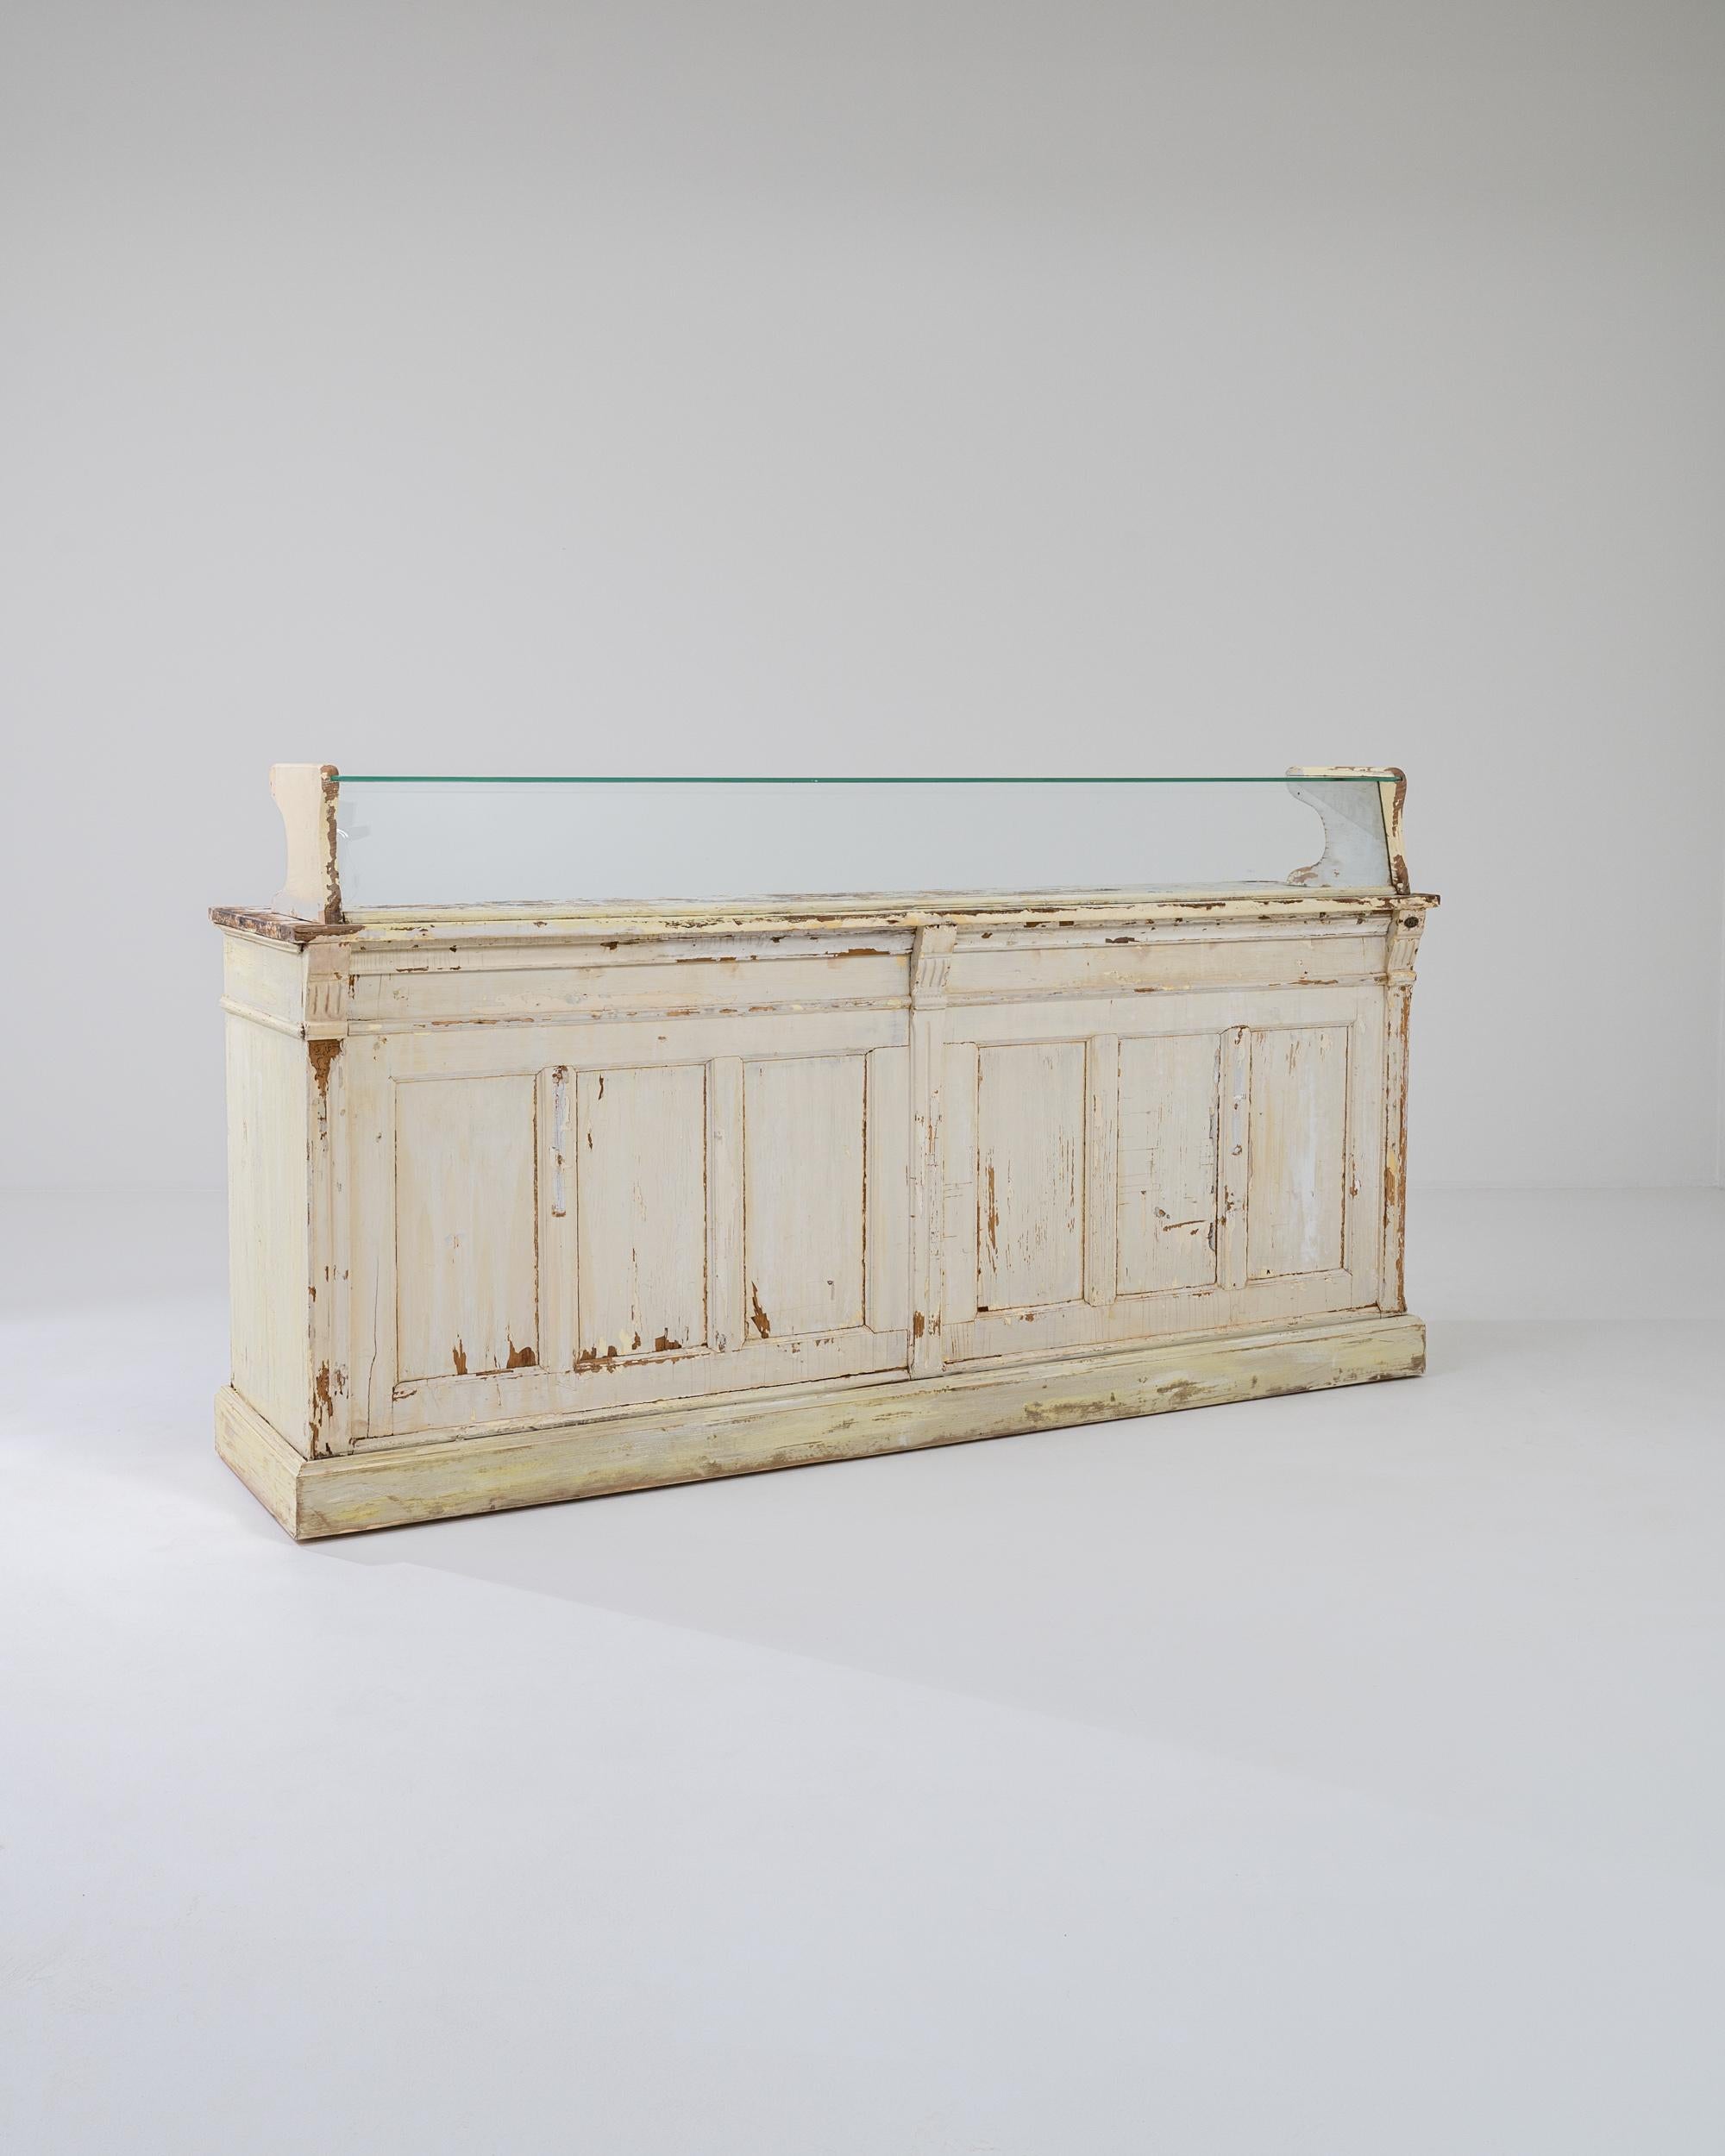 This vintage wooden bar offers an enchanting period piece. Made in France in the 1920s, it would likely have been used as a display case in a shop; a glass window protects the counter, shielding the delicate items on offer. A deep recess with a